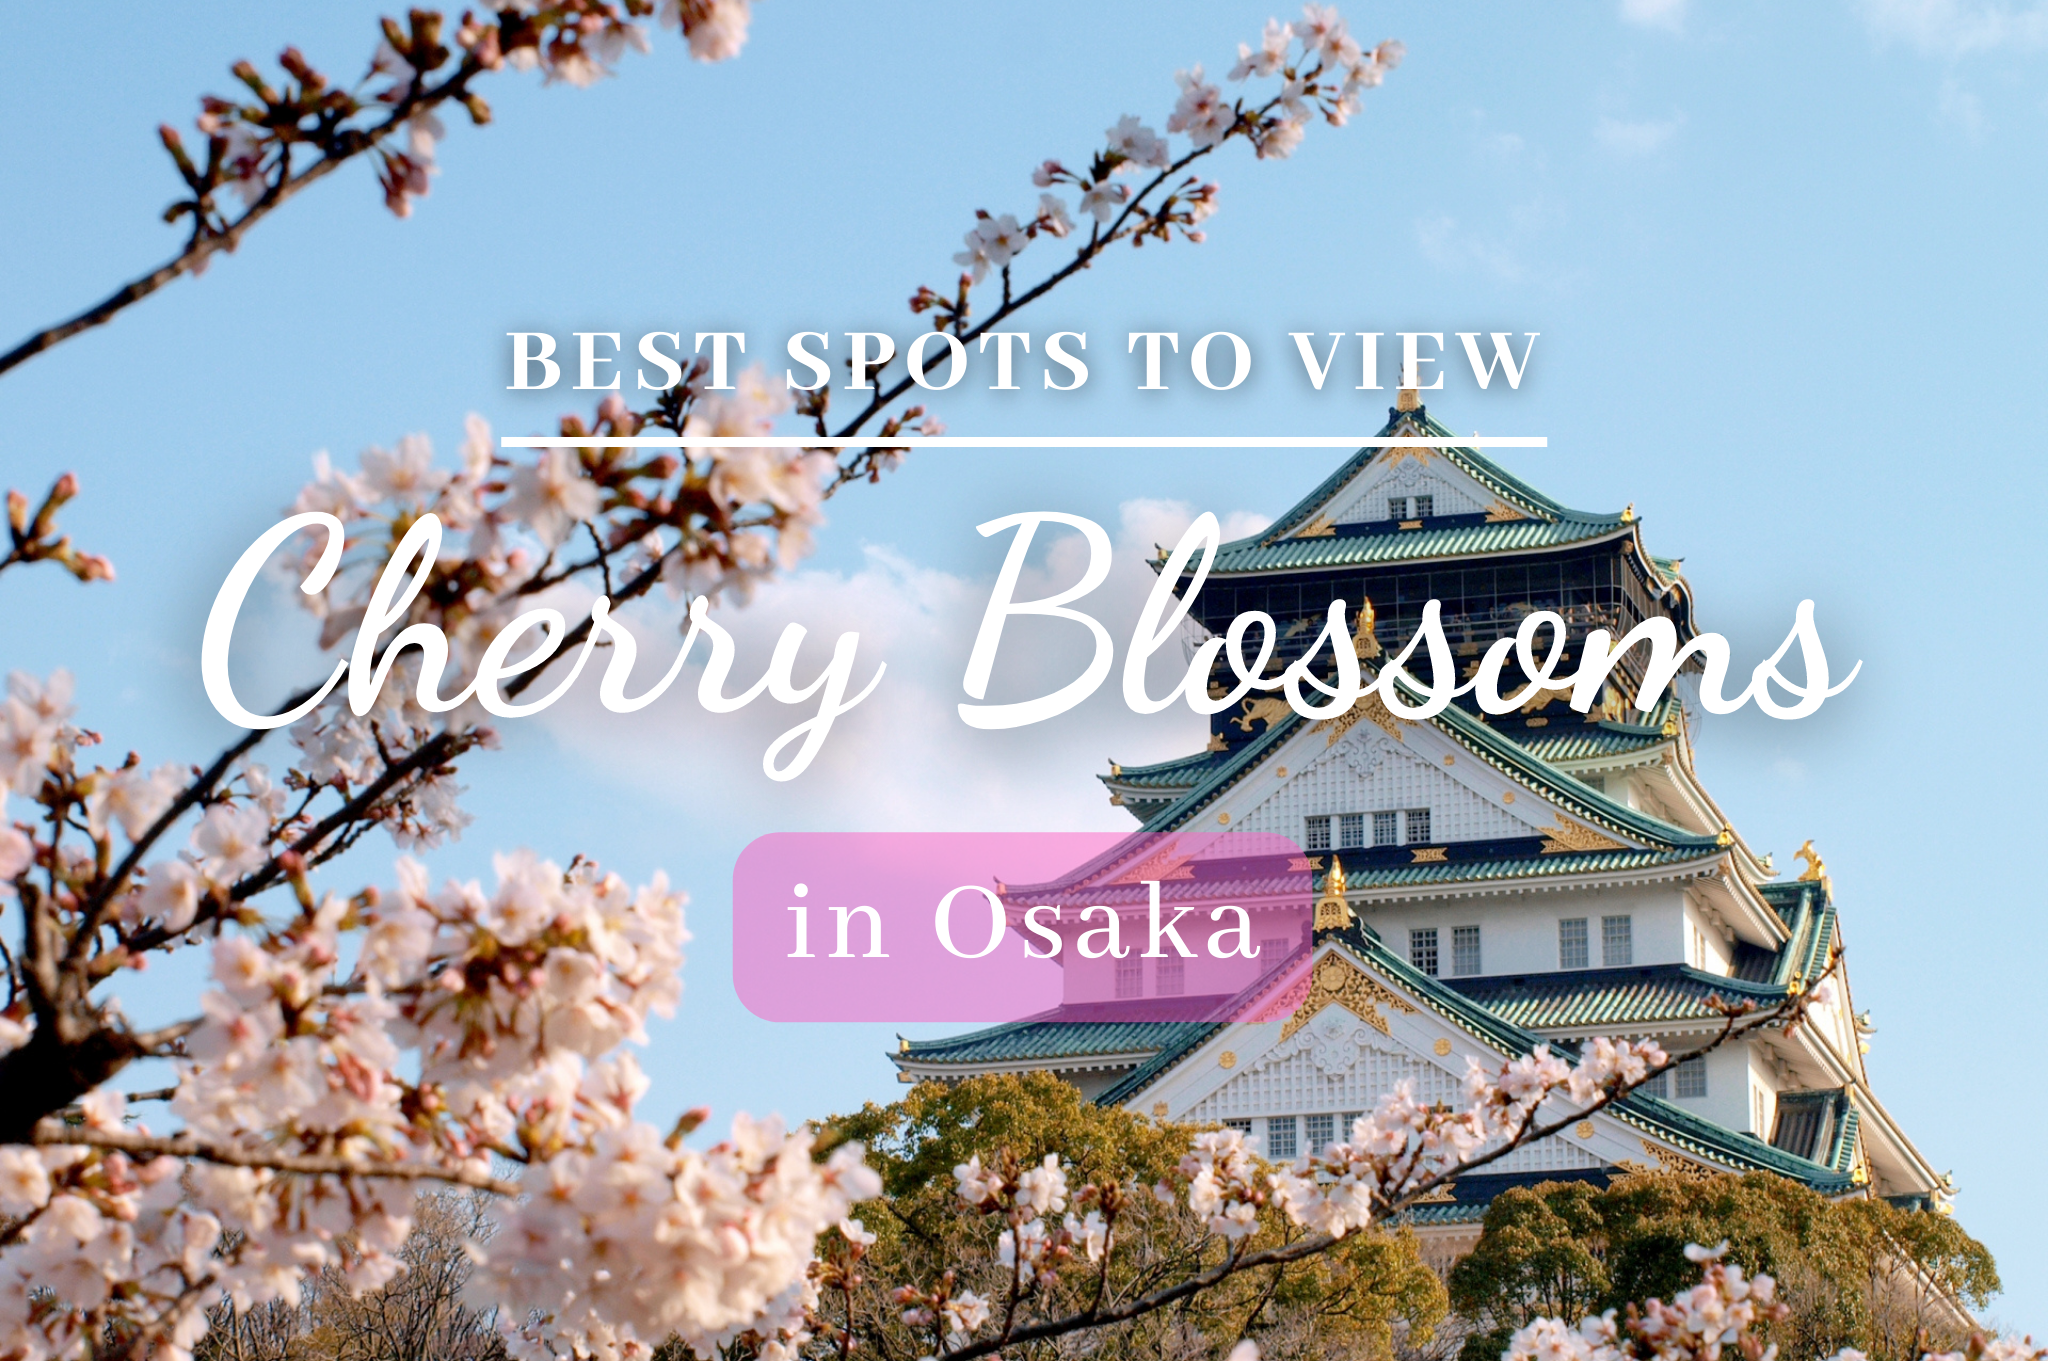 10 Best Spots to View Cherry Blossoms in Osaka